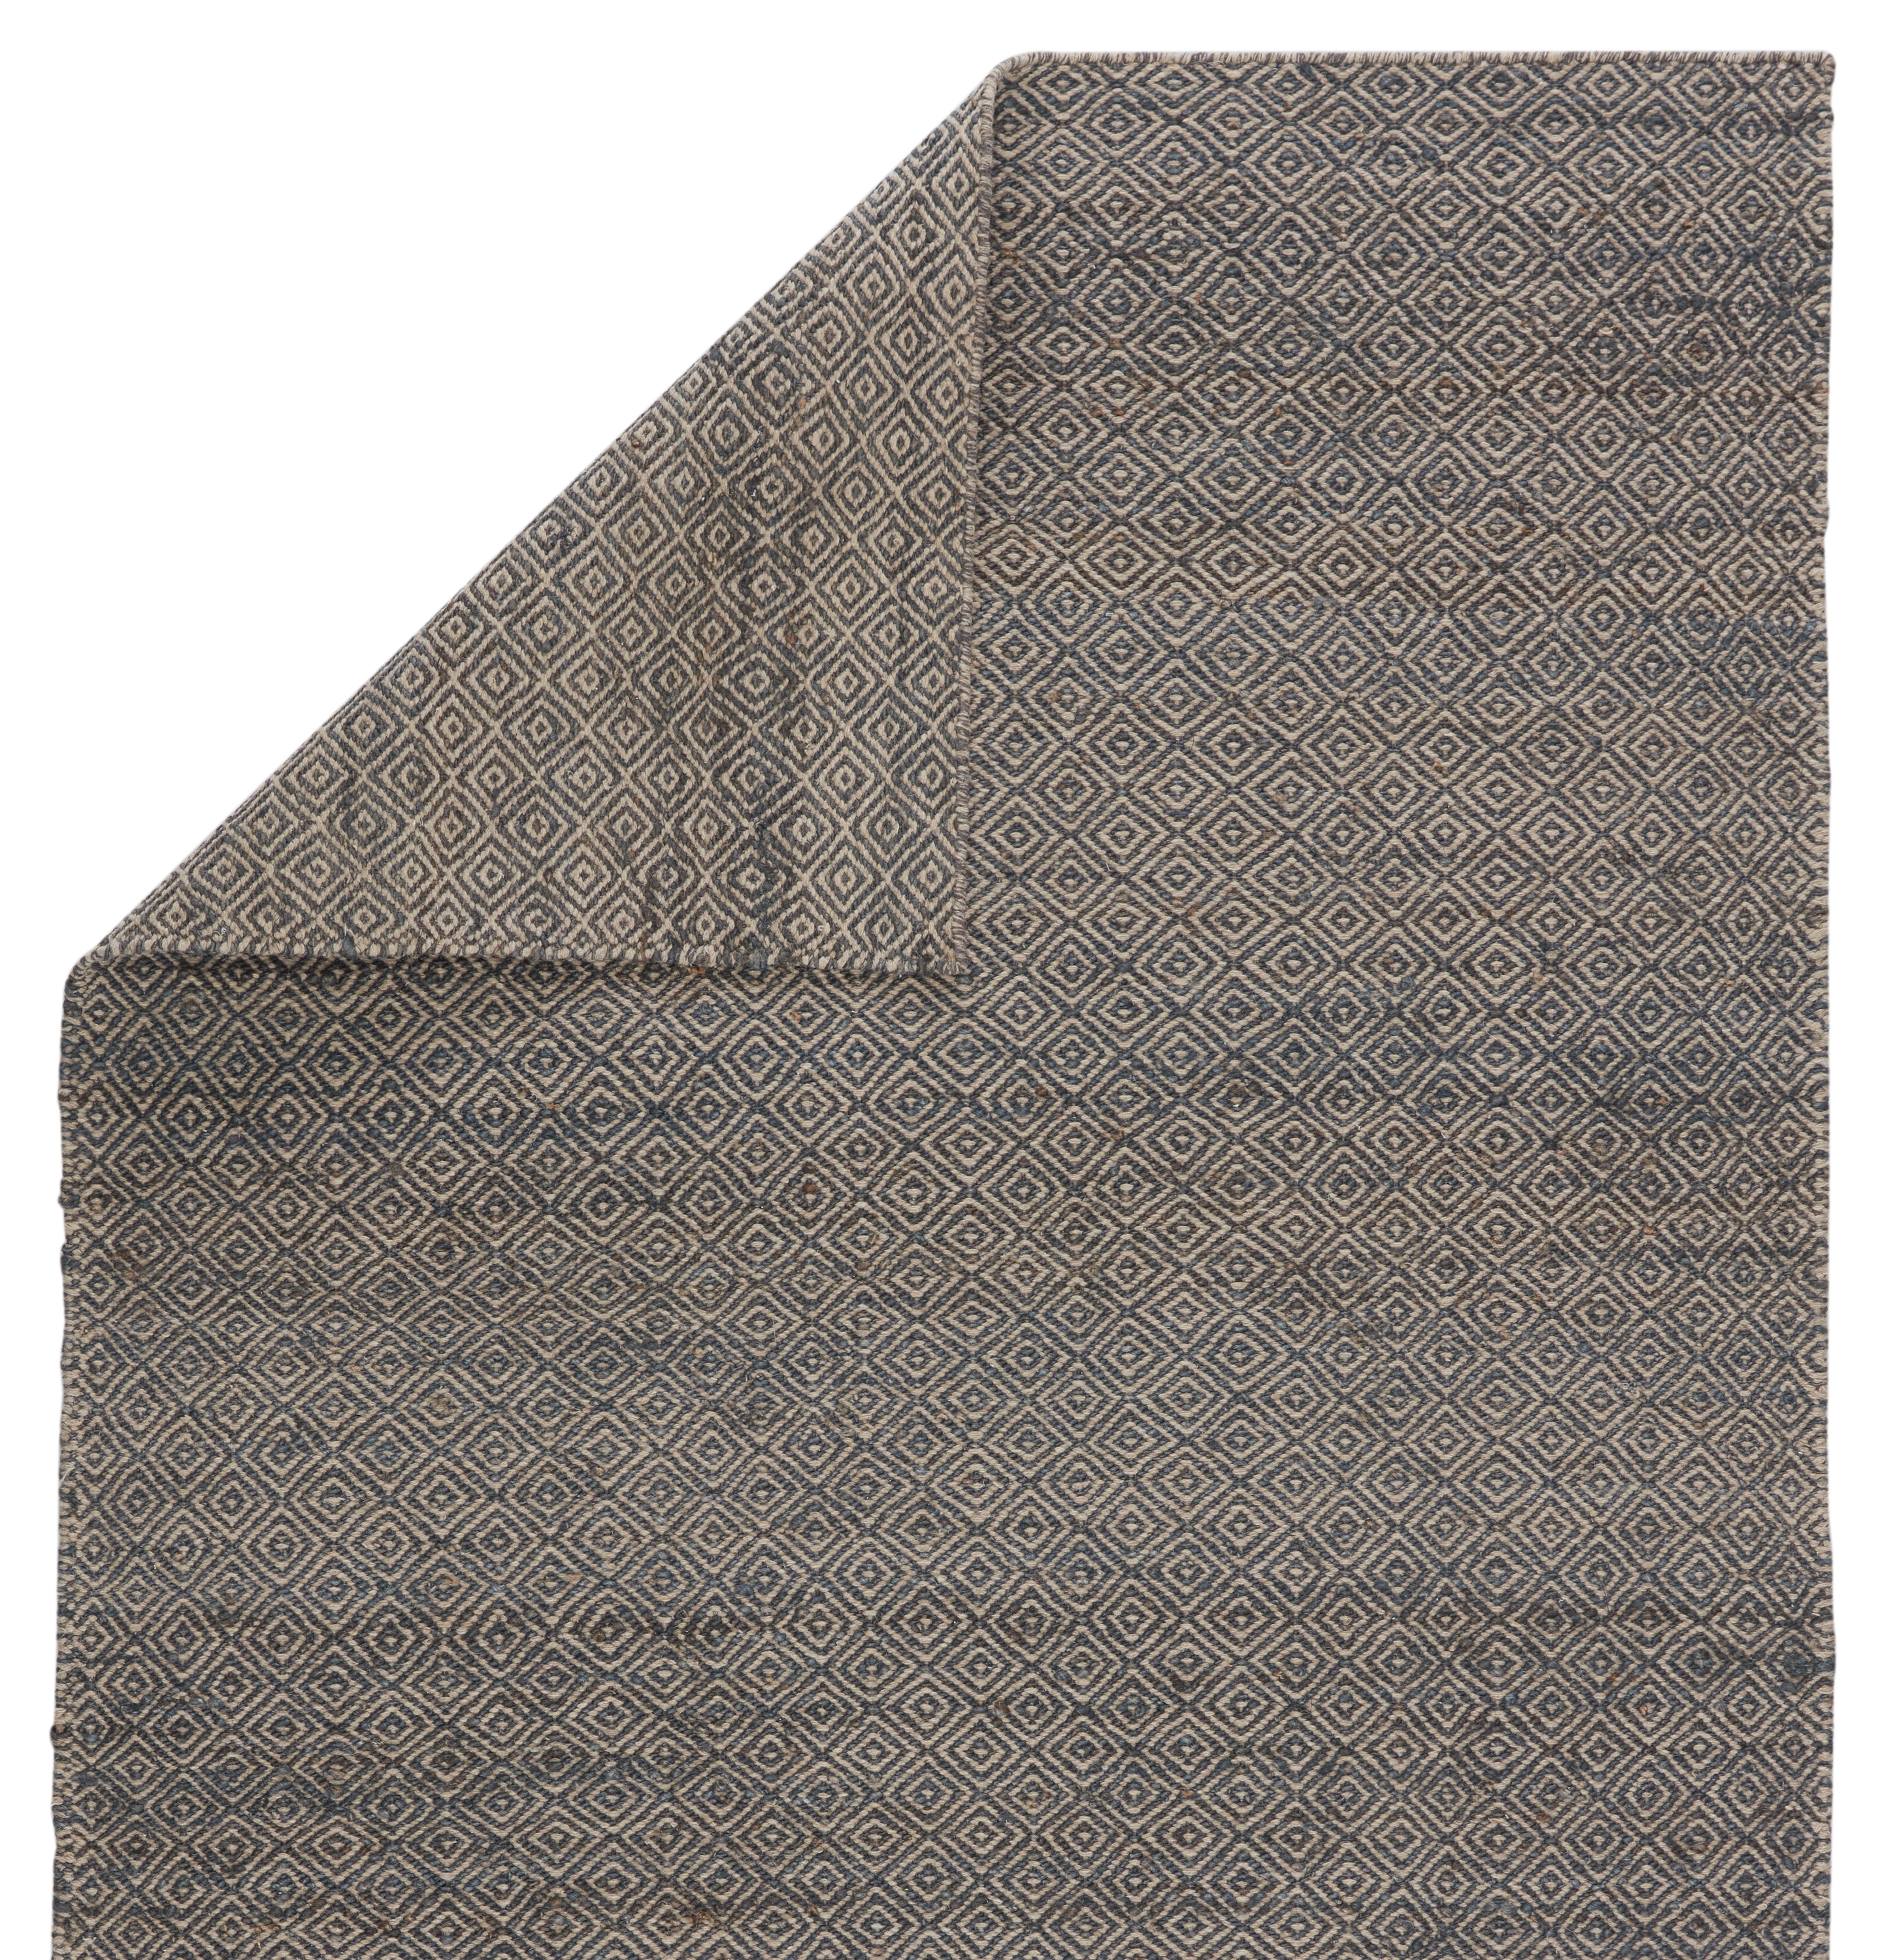 Wales Natural Geometric Gray/ White Area Rug (8' X 10') - Image 2